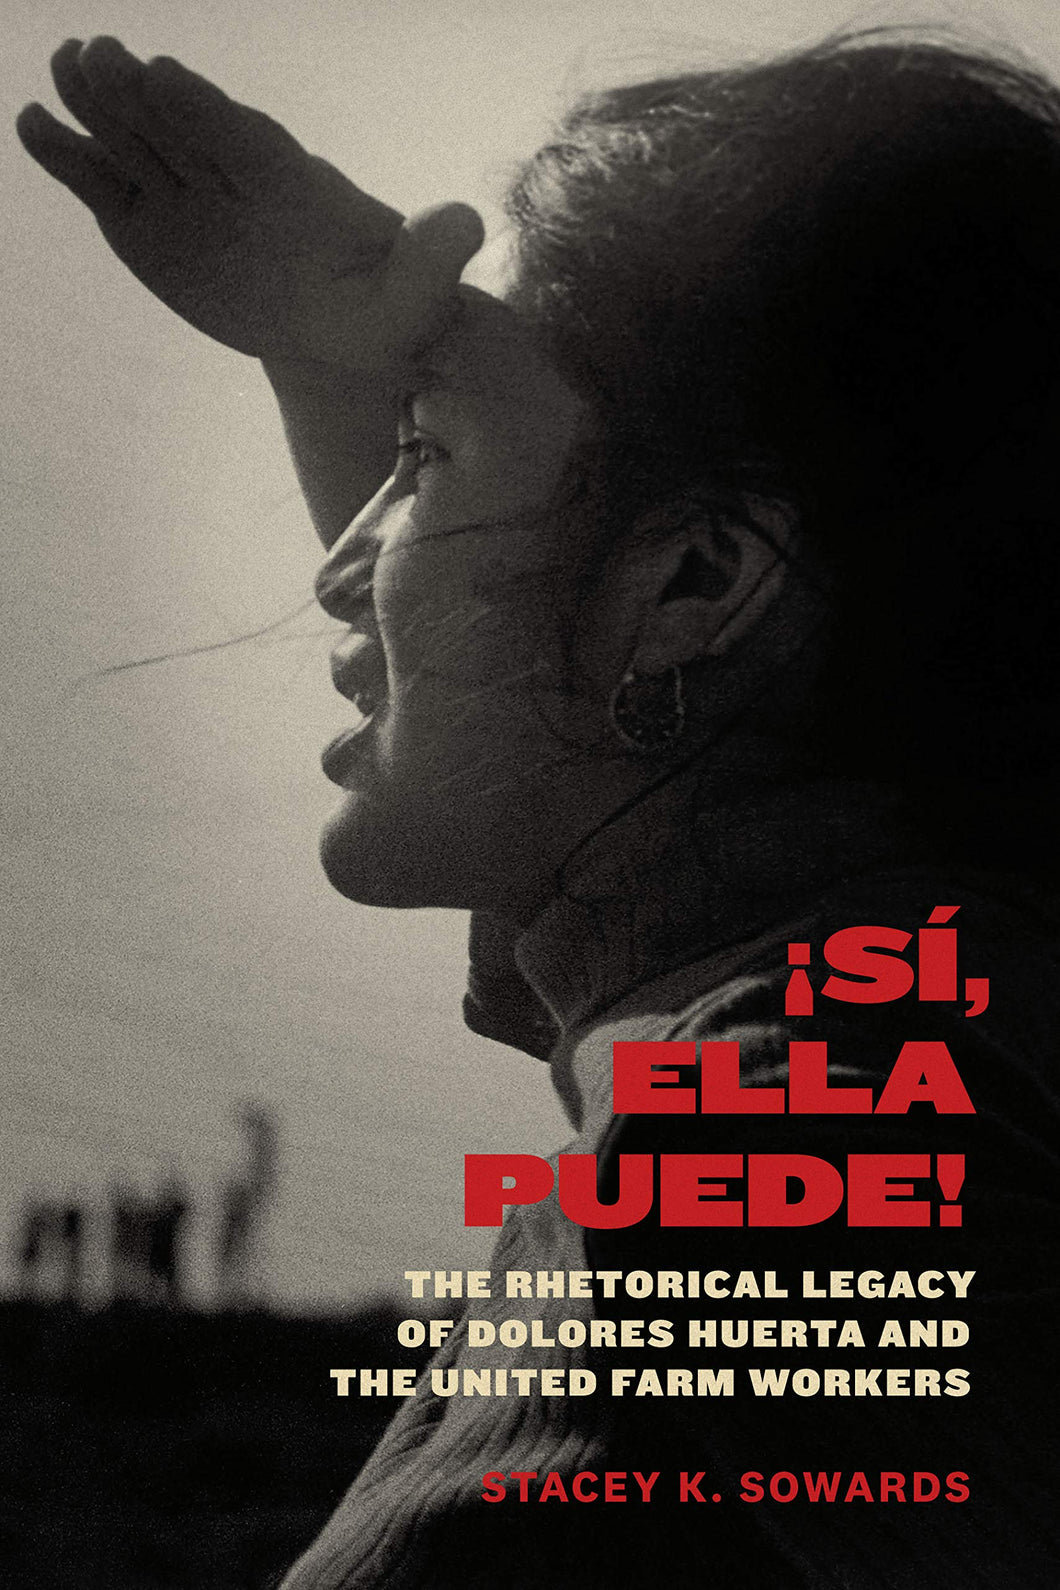 Sí, Ella Puede!: The Rhetorical Legacy of Dolores Huerta and the United Farm Workers by Stacey K. Sowards